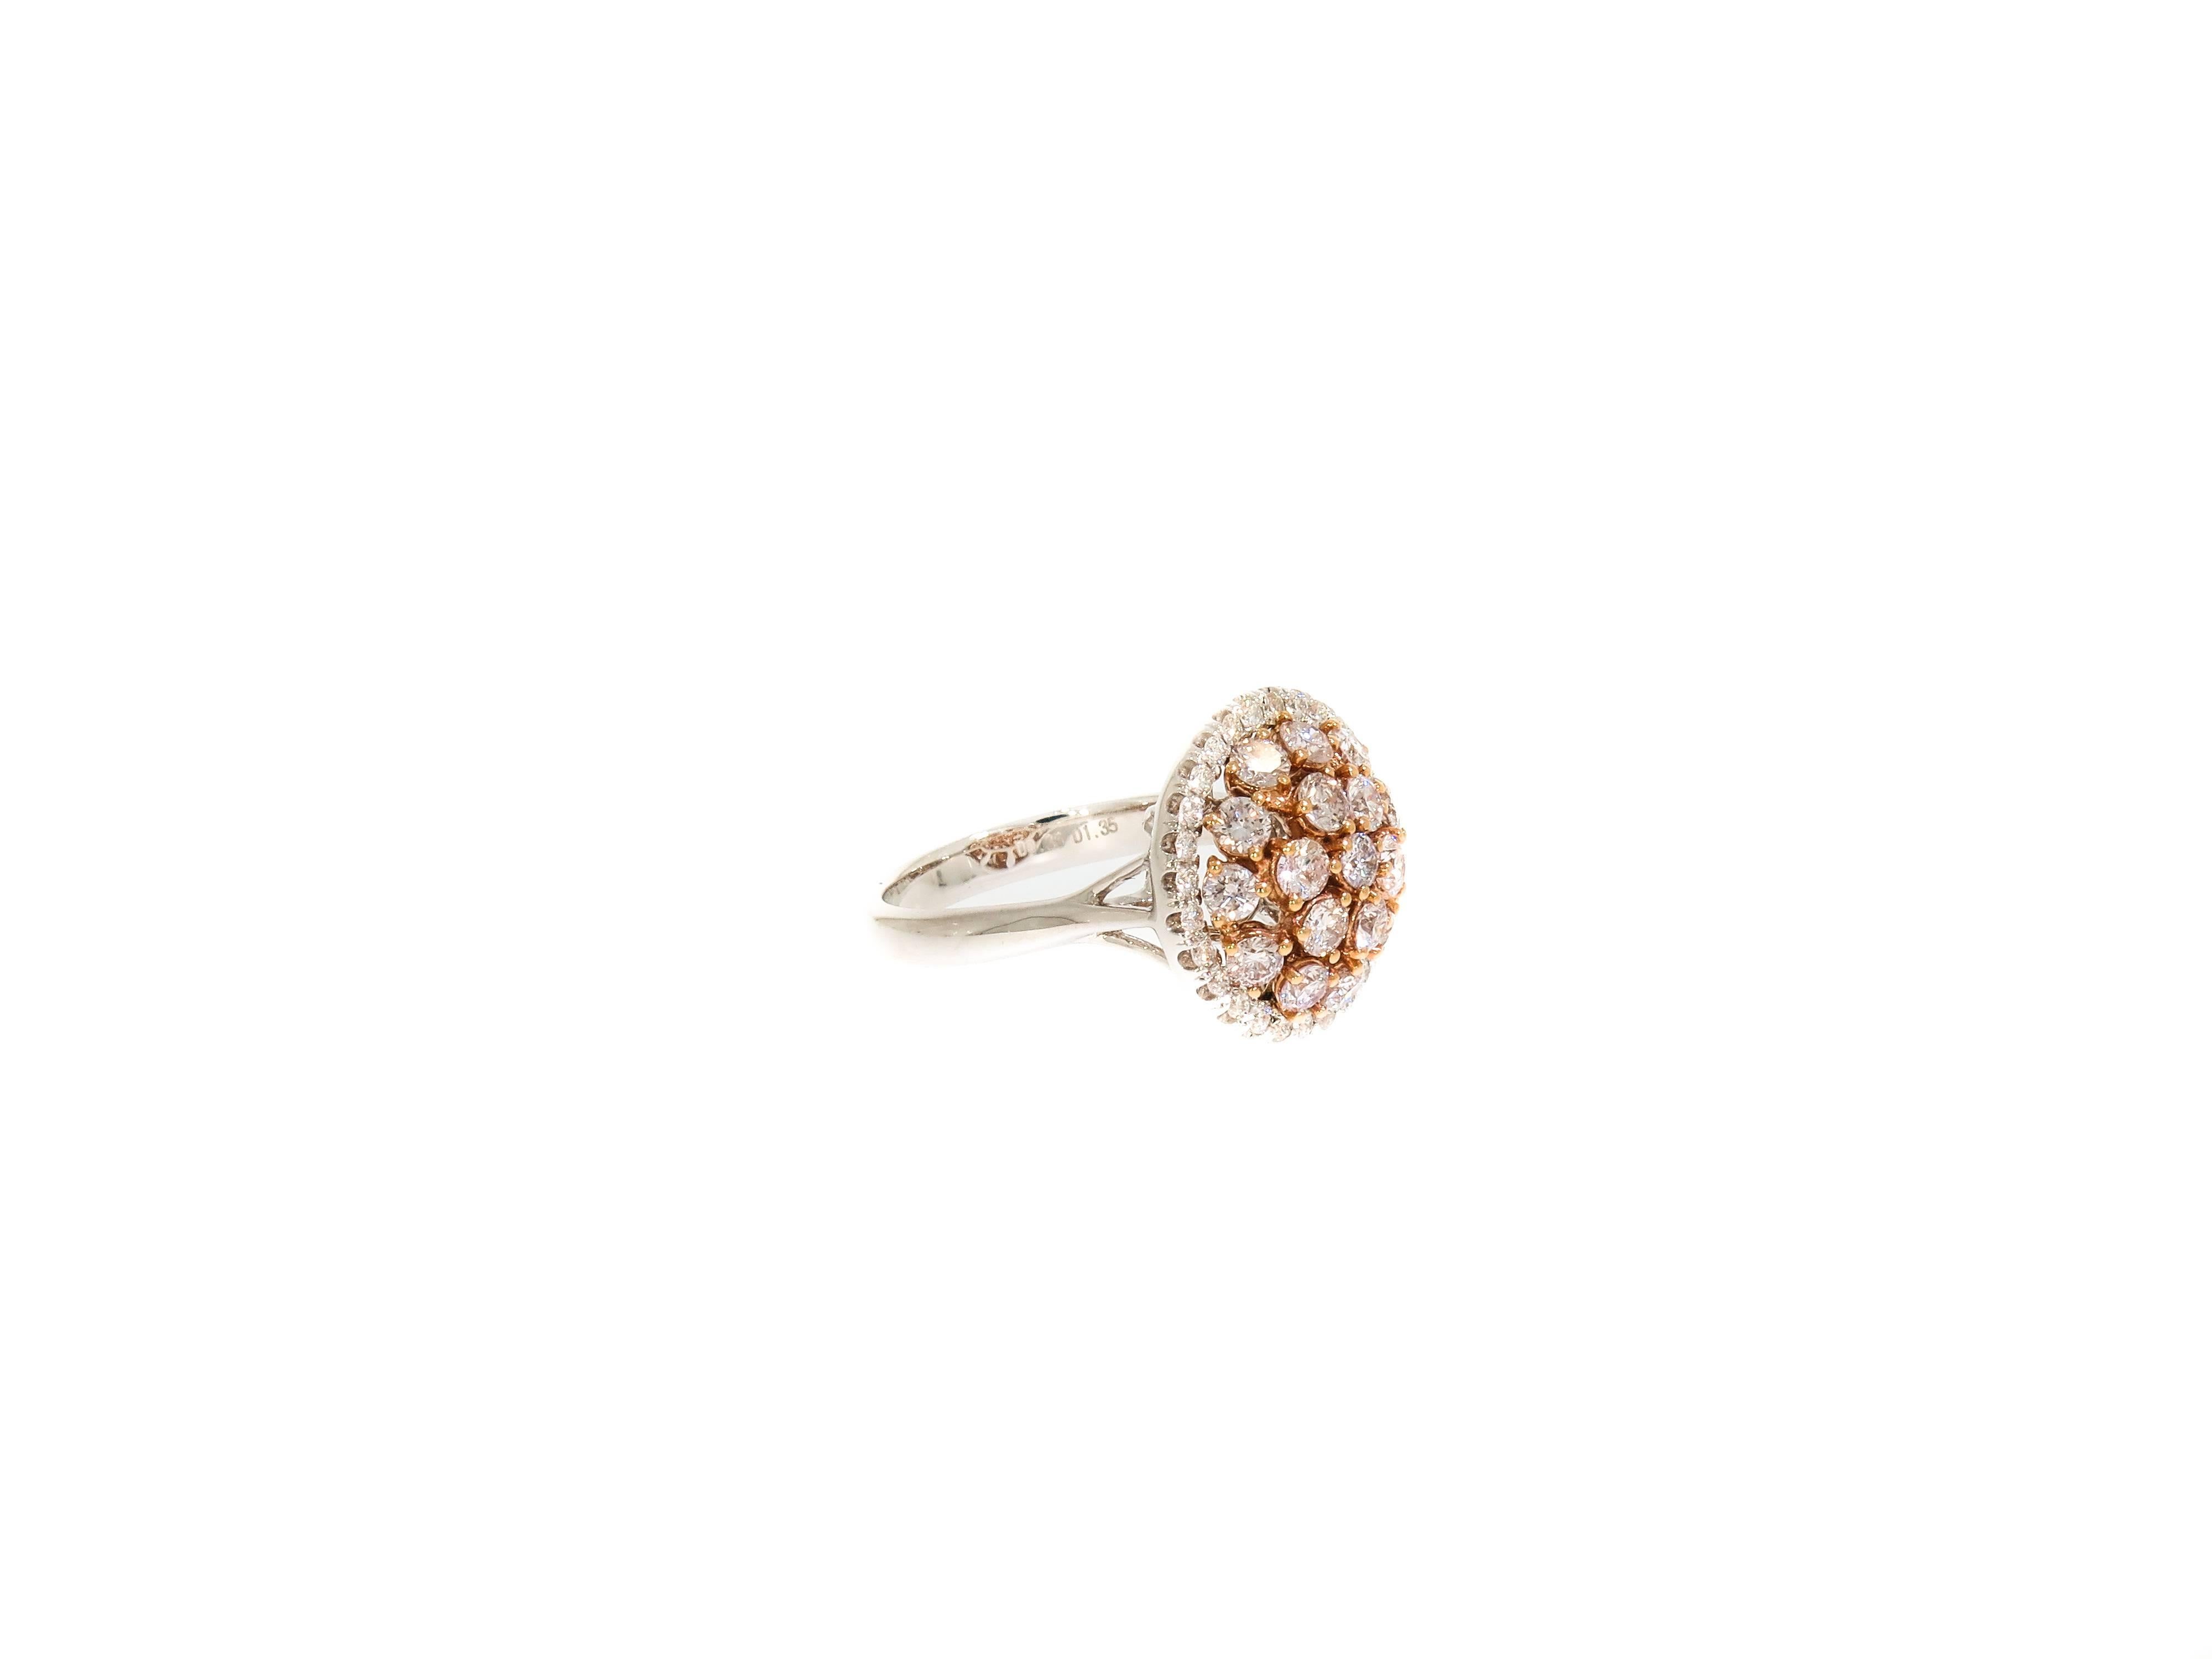 Glamour and seduction, are just some of the components that contribute to the creation of this unique ring. Designed in 18k rose gold, white and pink diamonds.
A swirl of beauty, featuring 28 white round diamonds (0.36 carats) and 18 pink diamonds